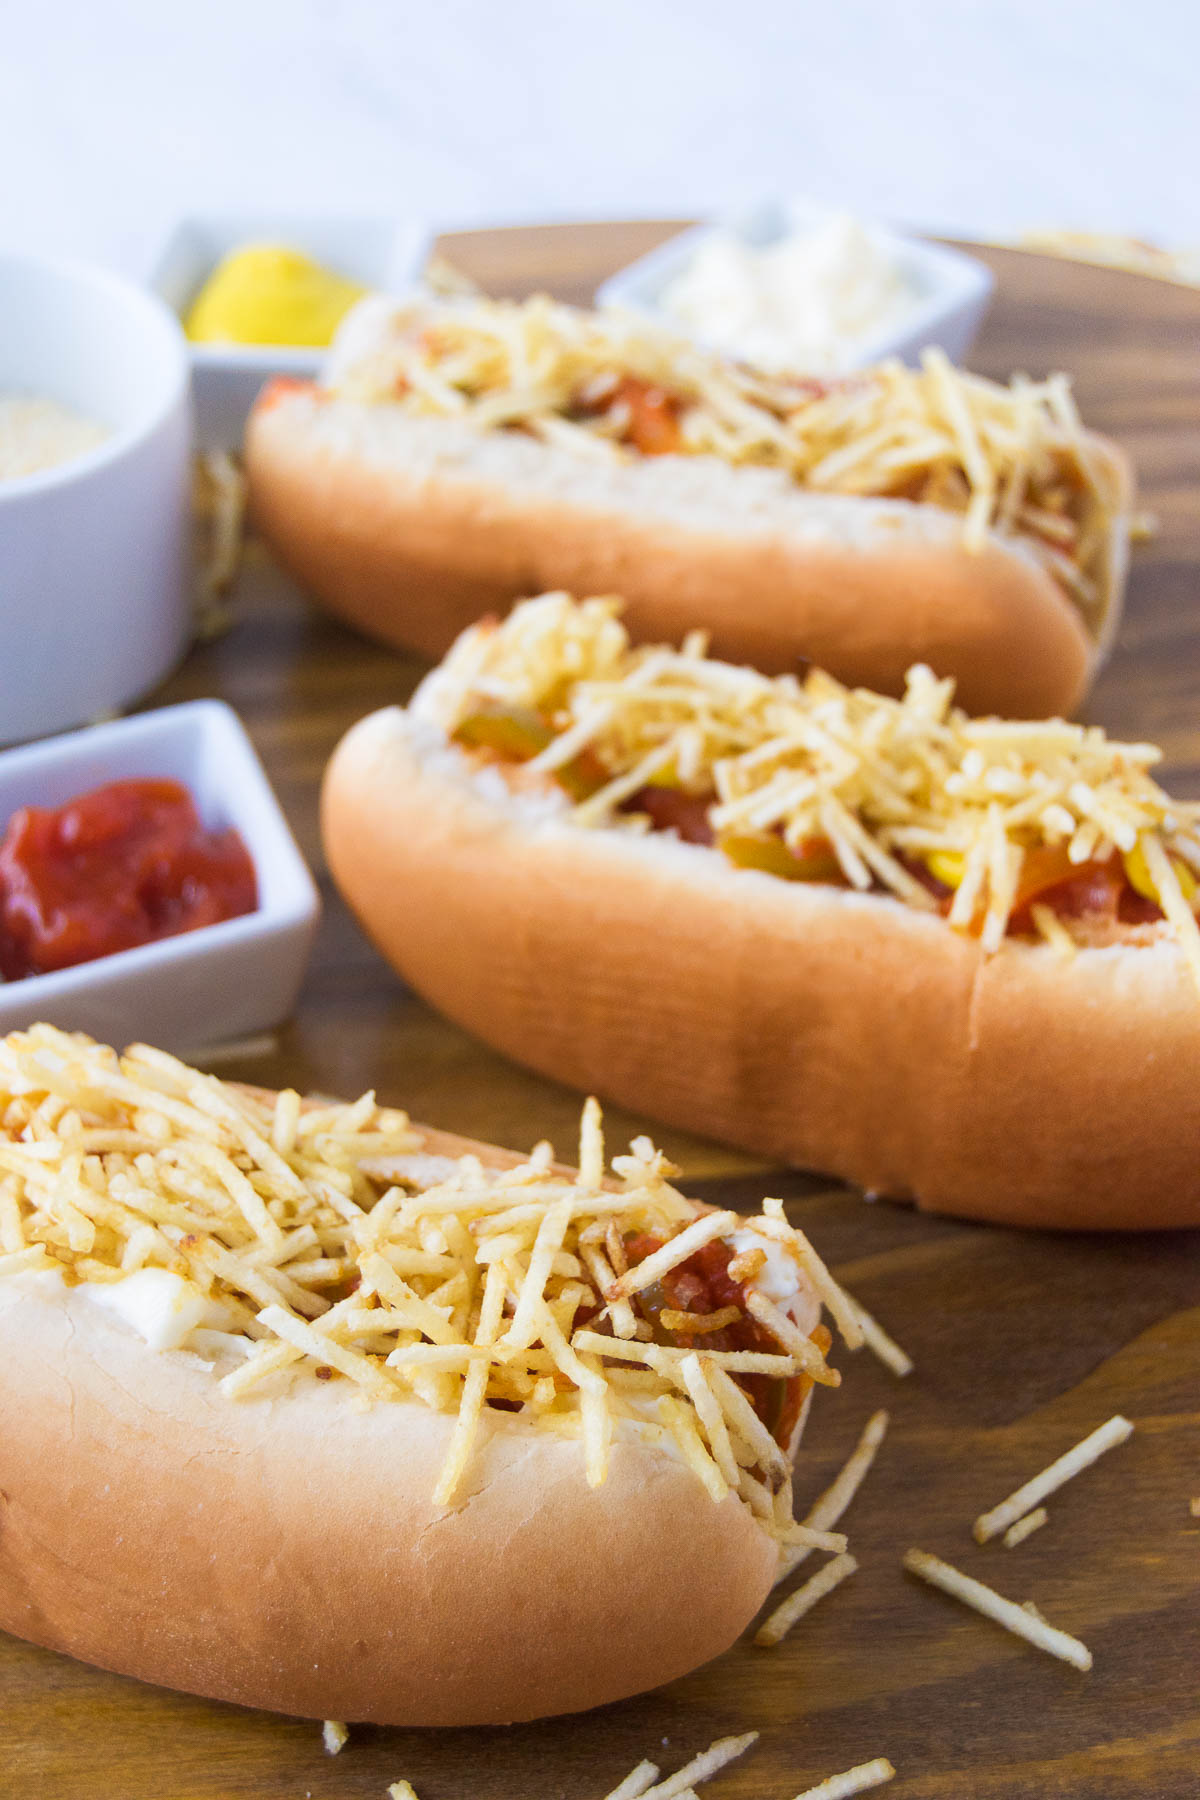 Cachorro Quente  Traditional Hot Dog From Brazil